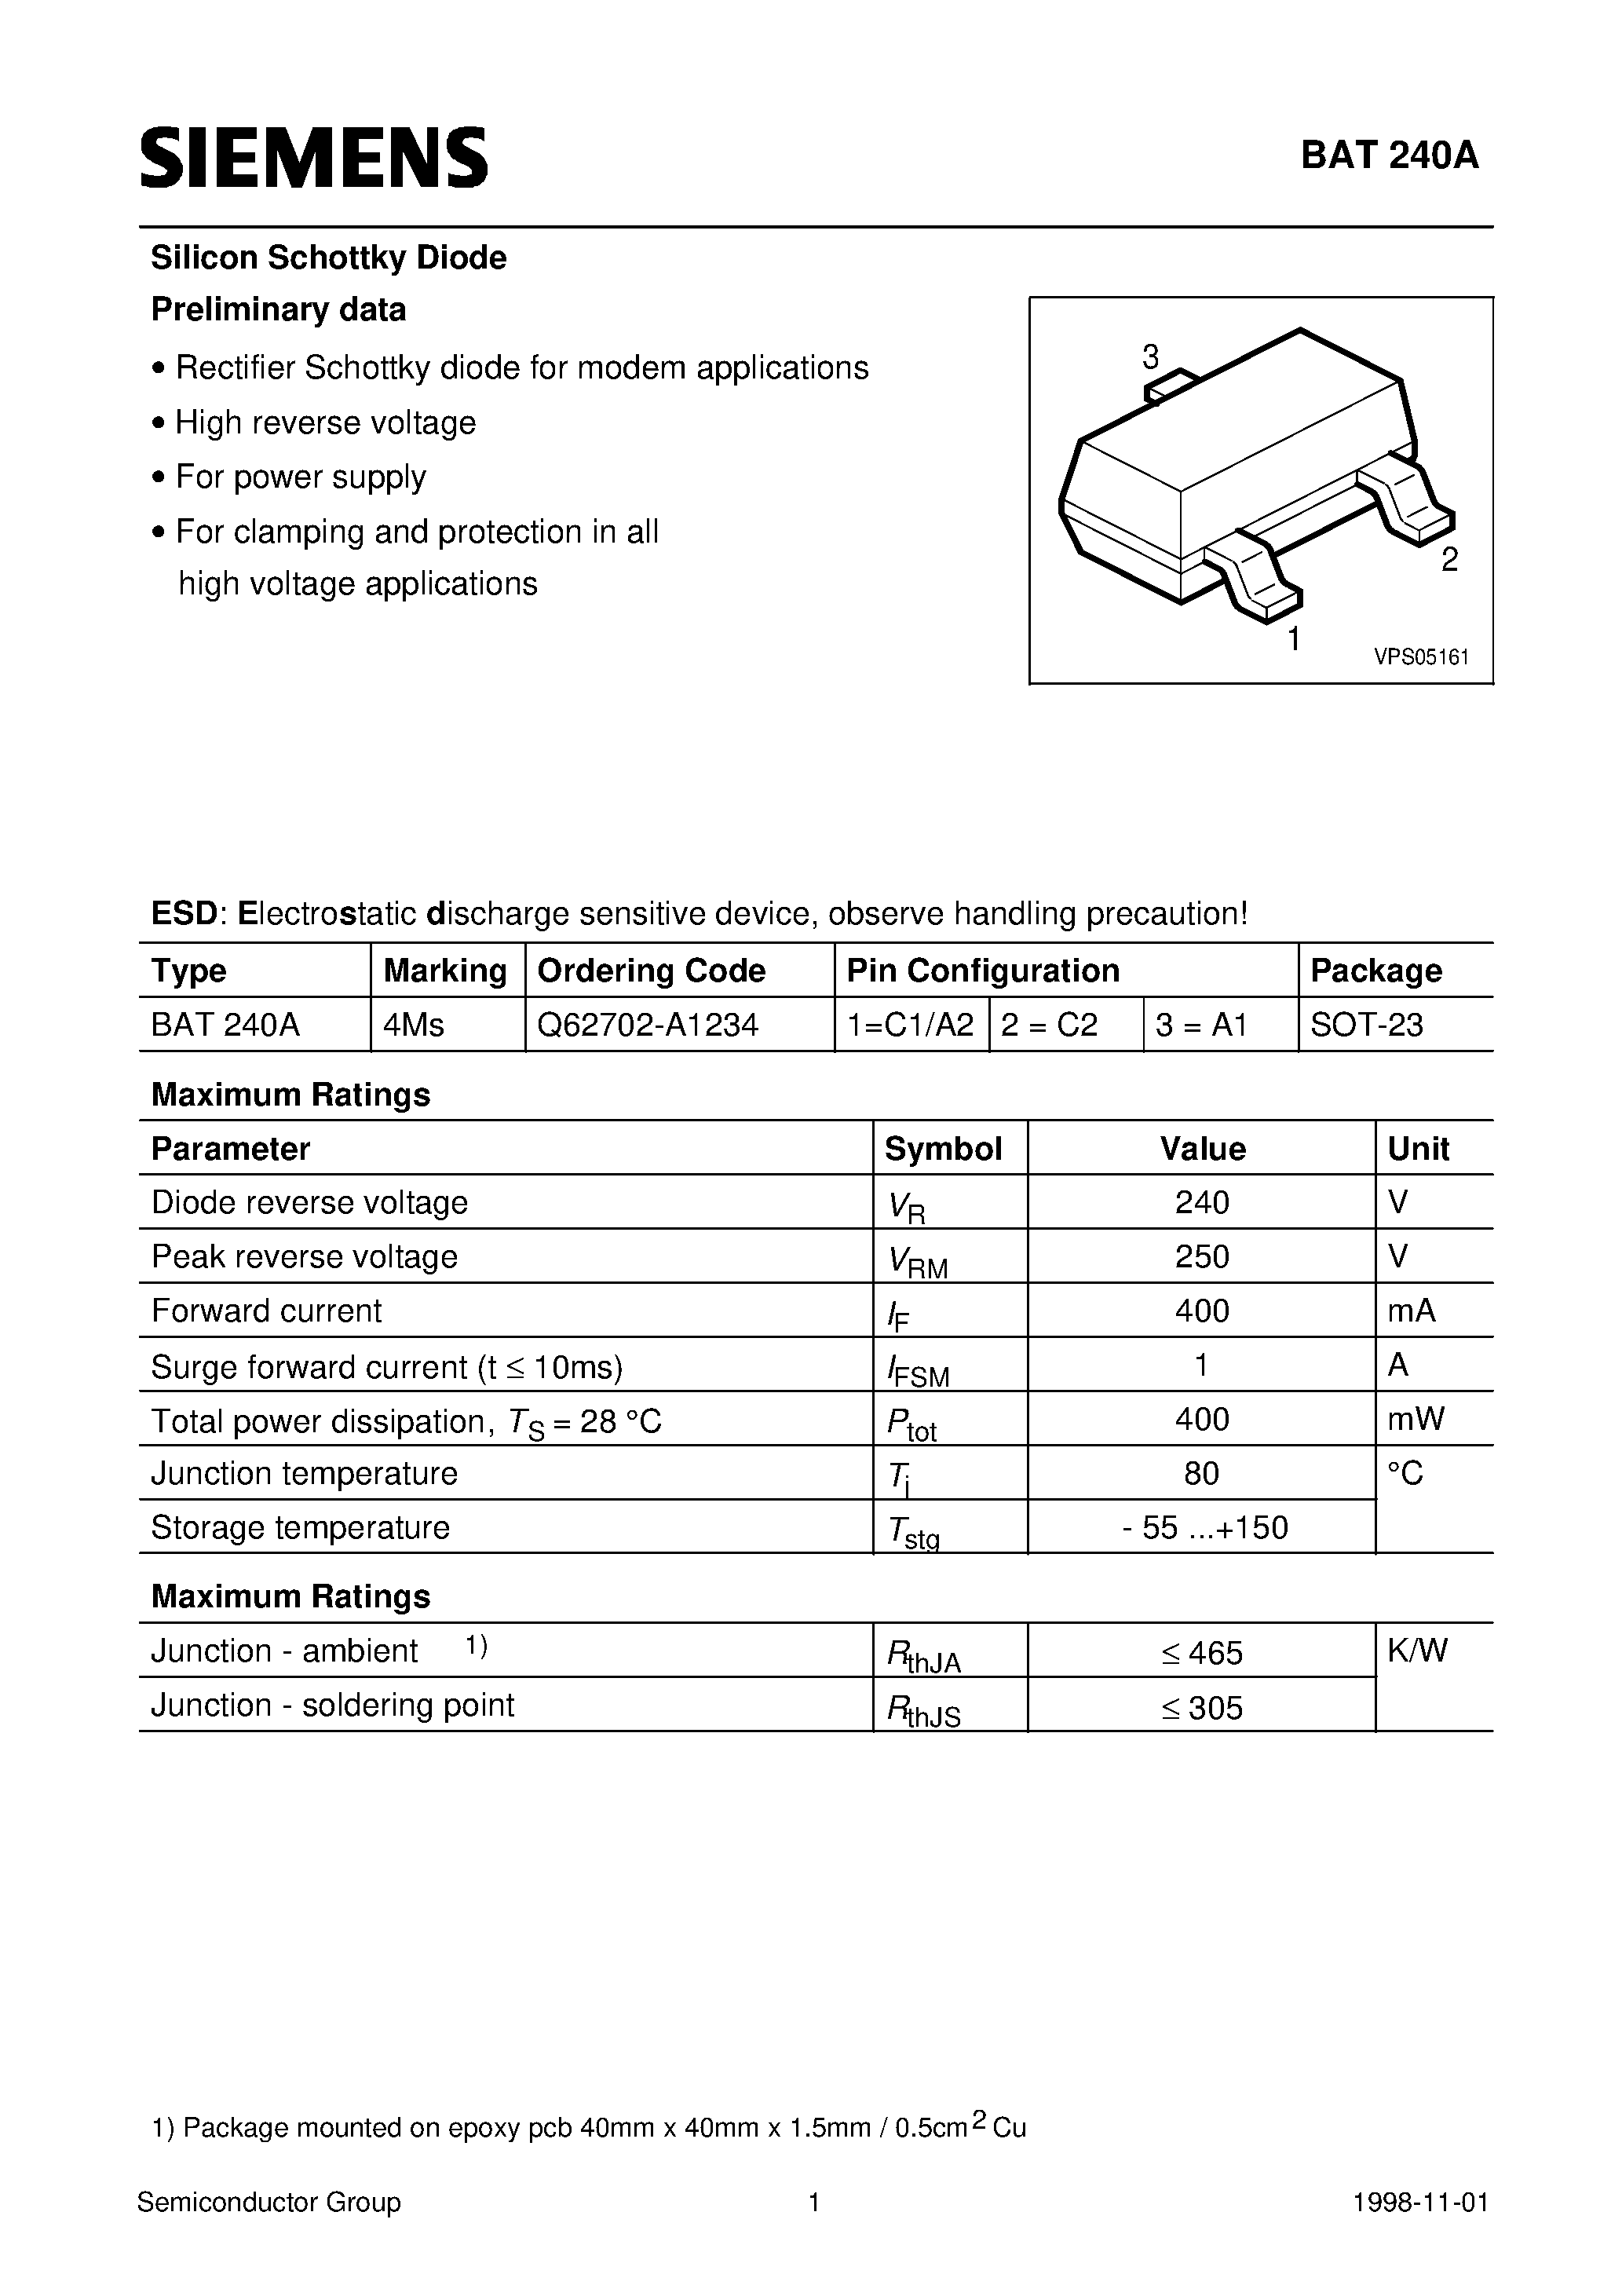 Datasheet BAT240A - Silicon Schottky Diode (Rectifier Schottky diode for modem applications High reverse voltage For power supply) page 1